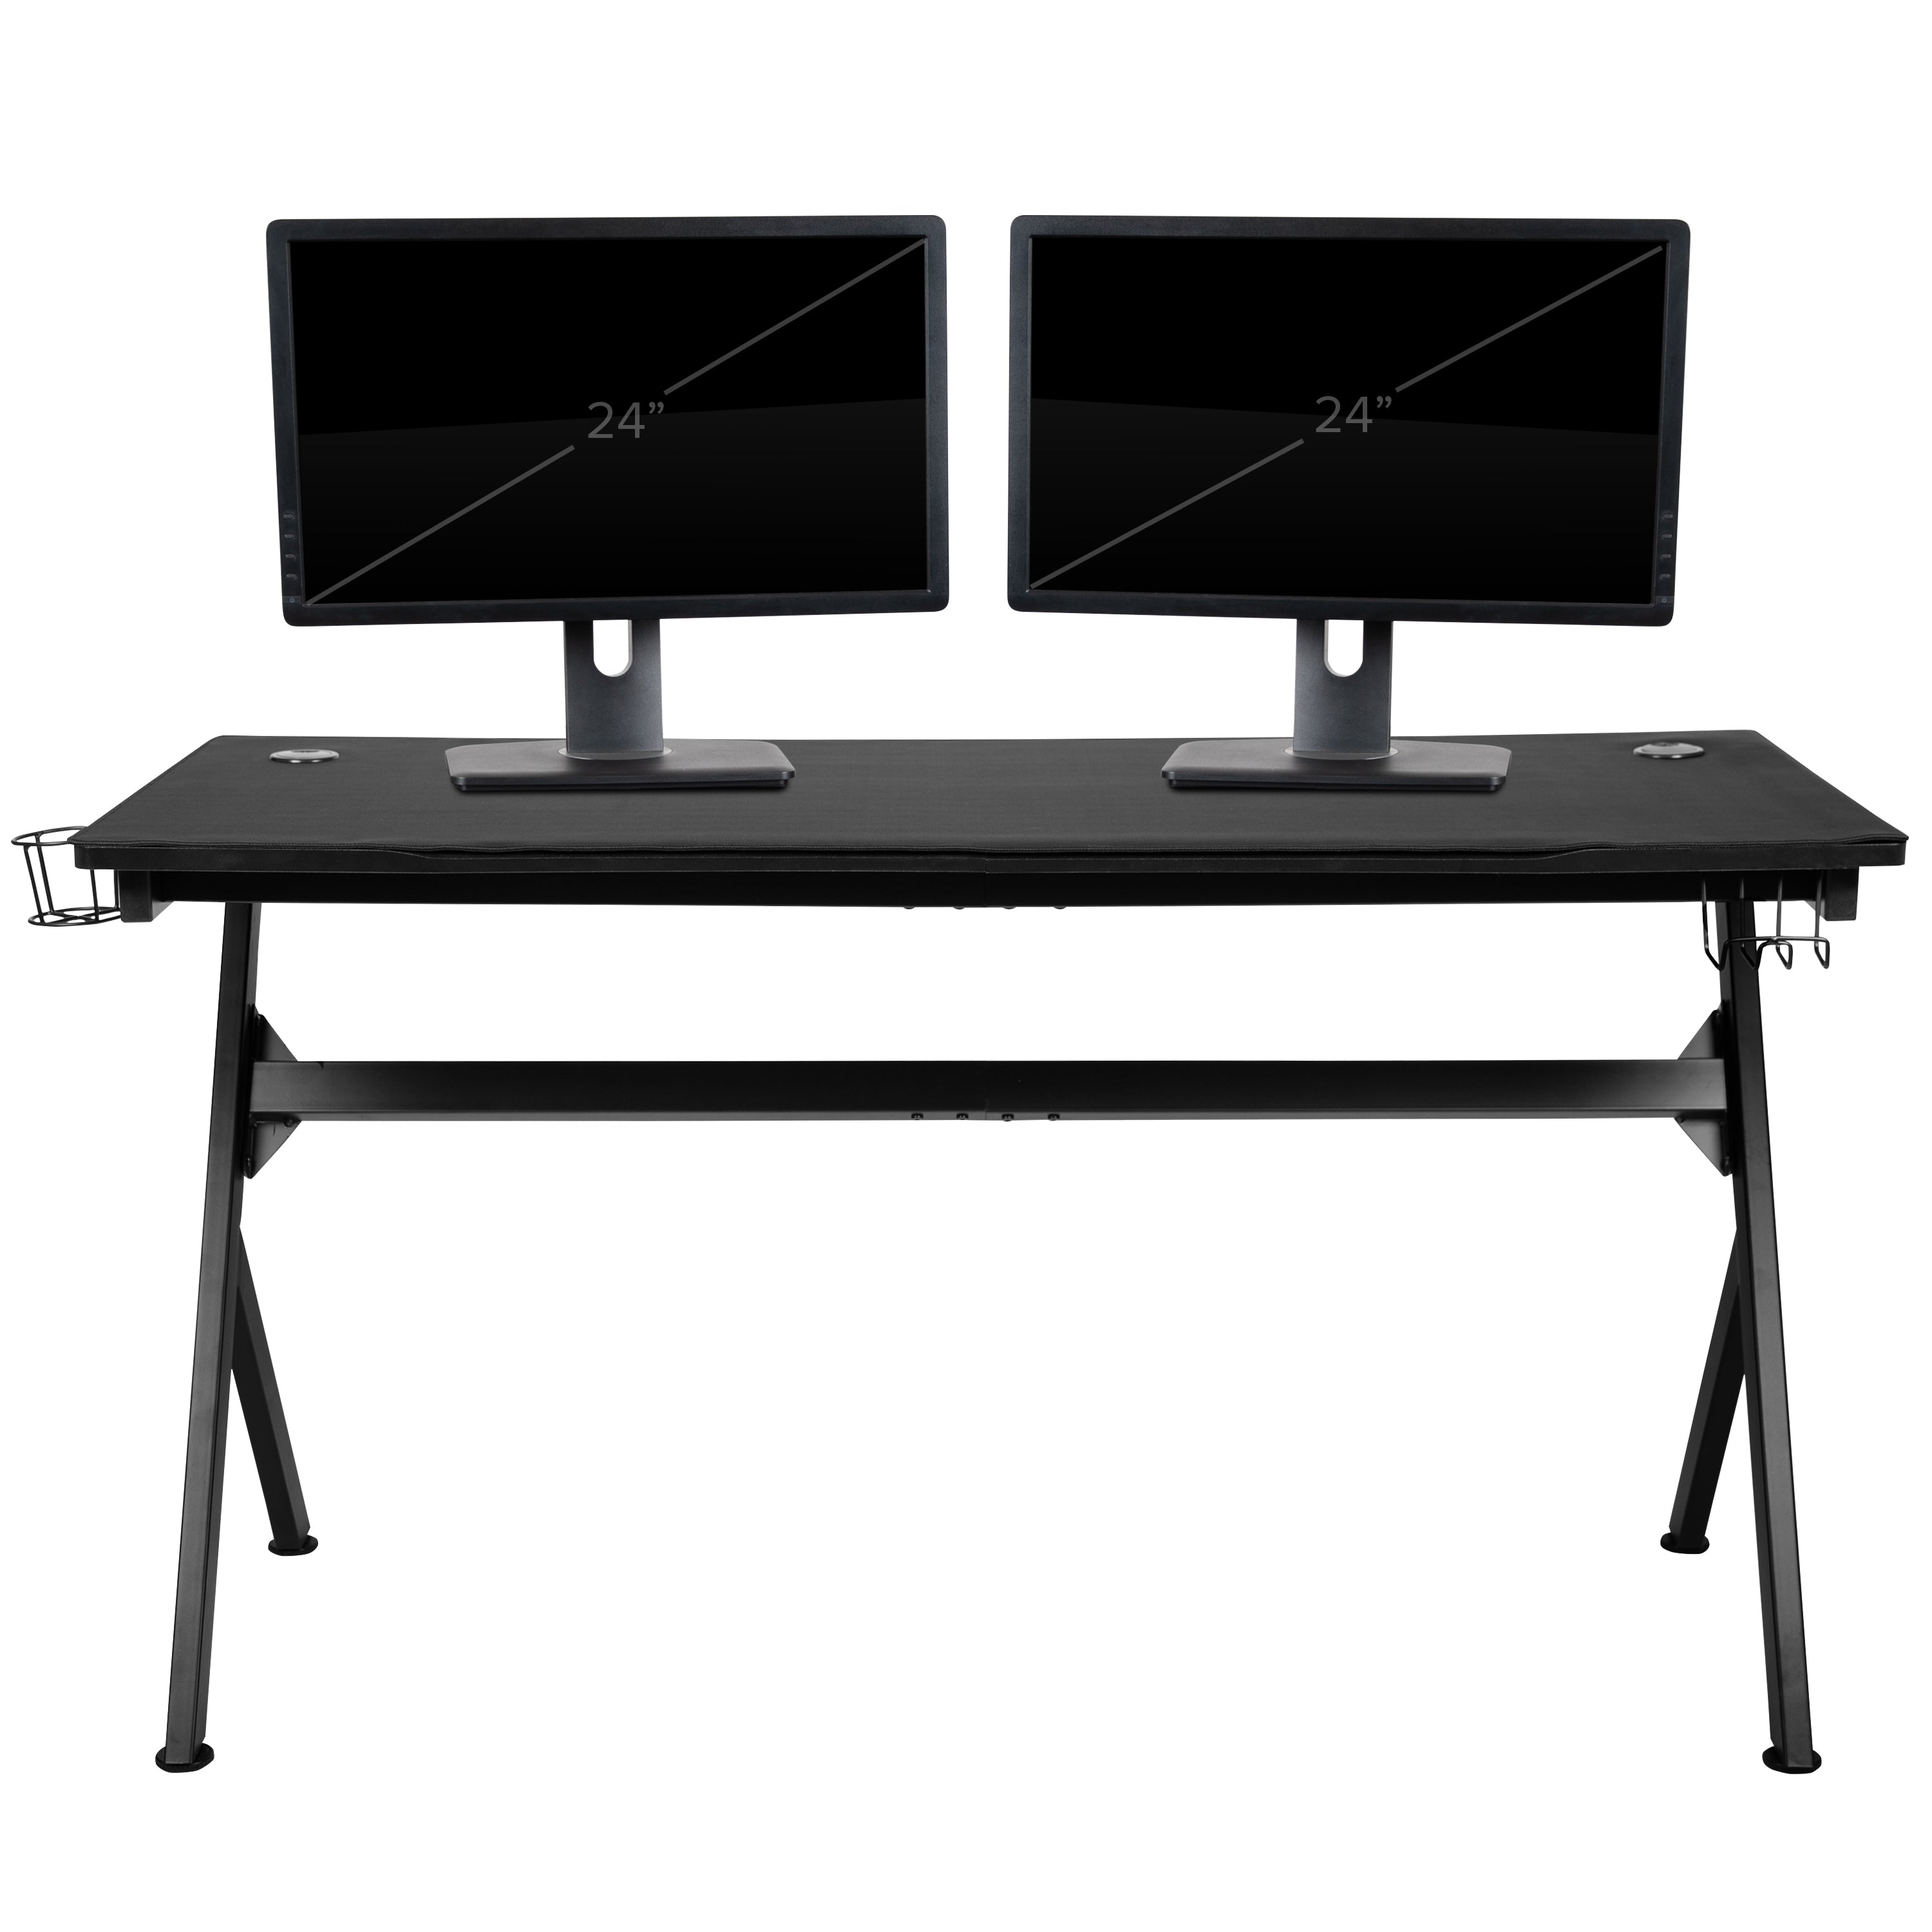 55" x 24" Extra Large Gaming Desk with Headphone Hook and Cup Holder - Free Mouse Pad-Desk-Flash Furniture-Wall2Wall Furnishings